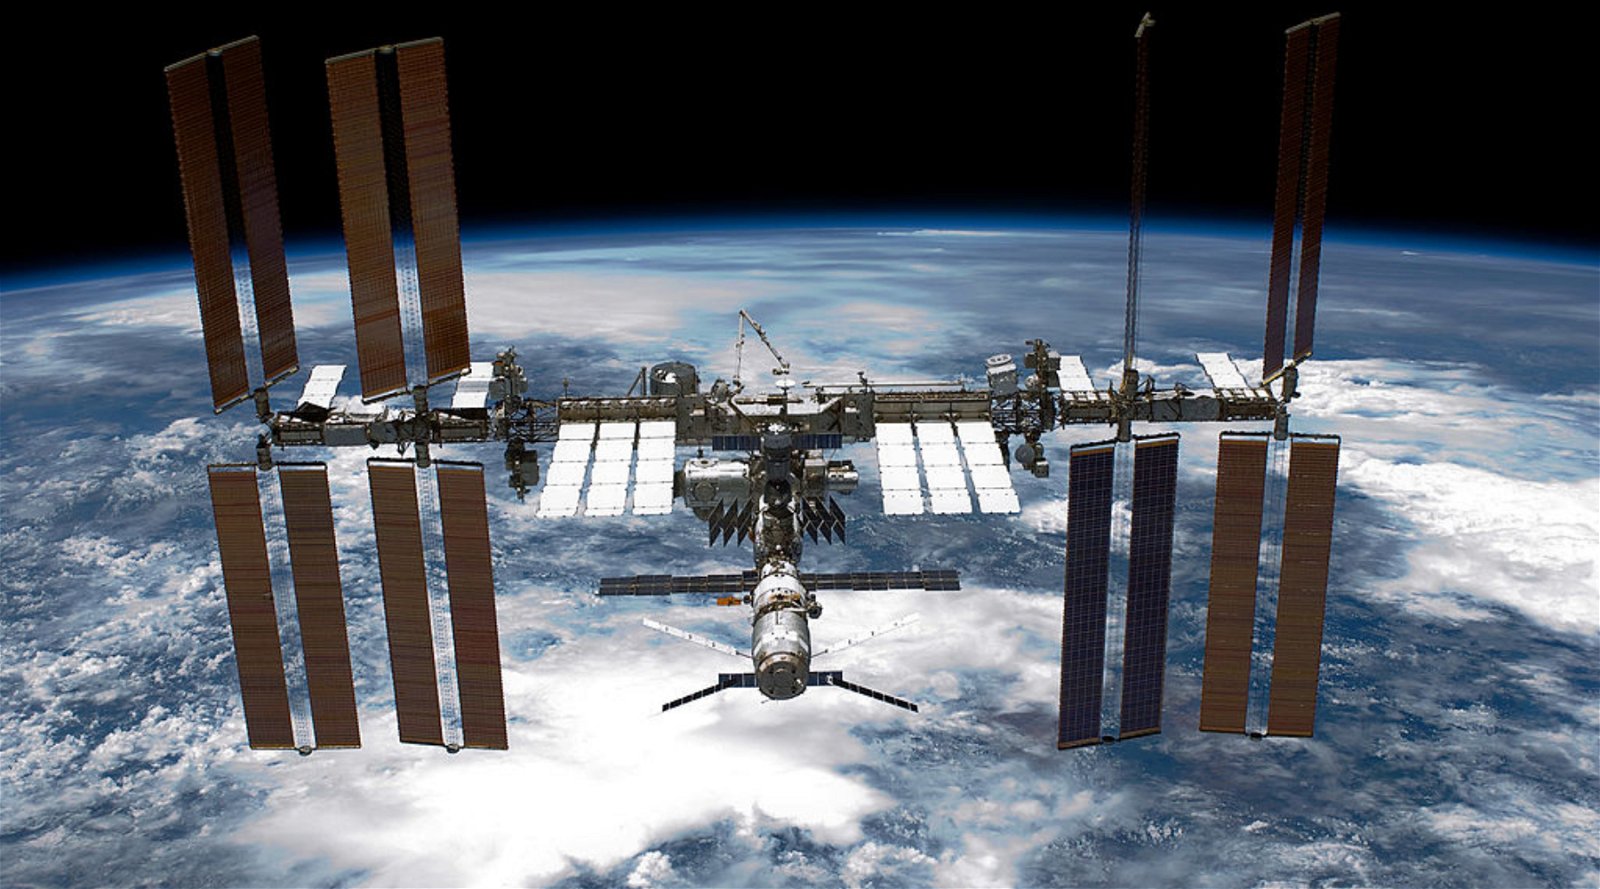 The International Space Station has to drift off again, this time to an Argentinean satellite